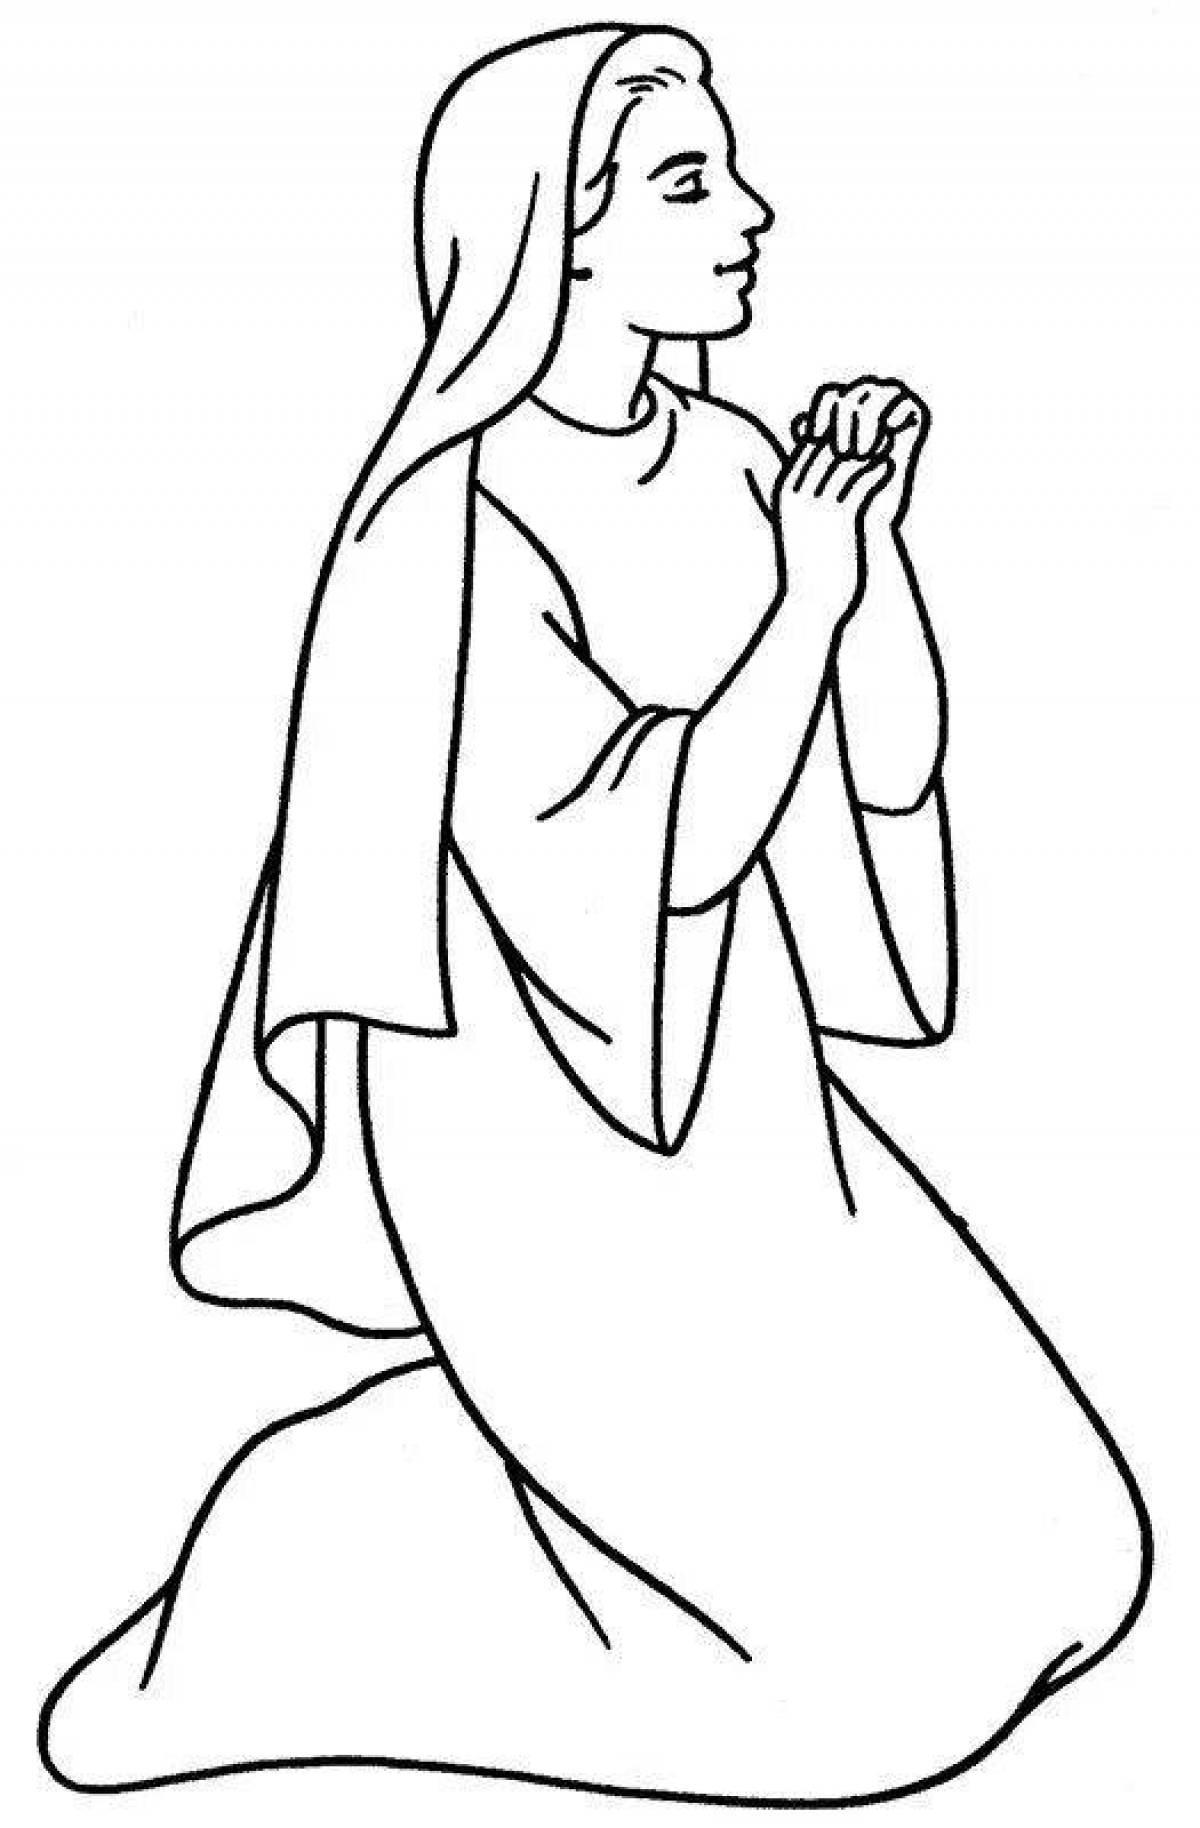 Illustrative virgin mary coloring page